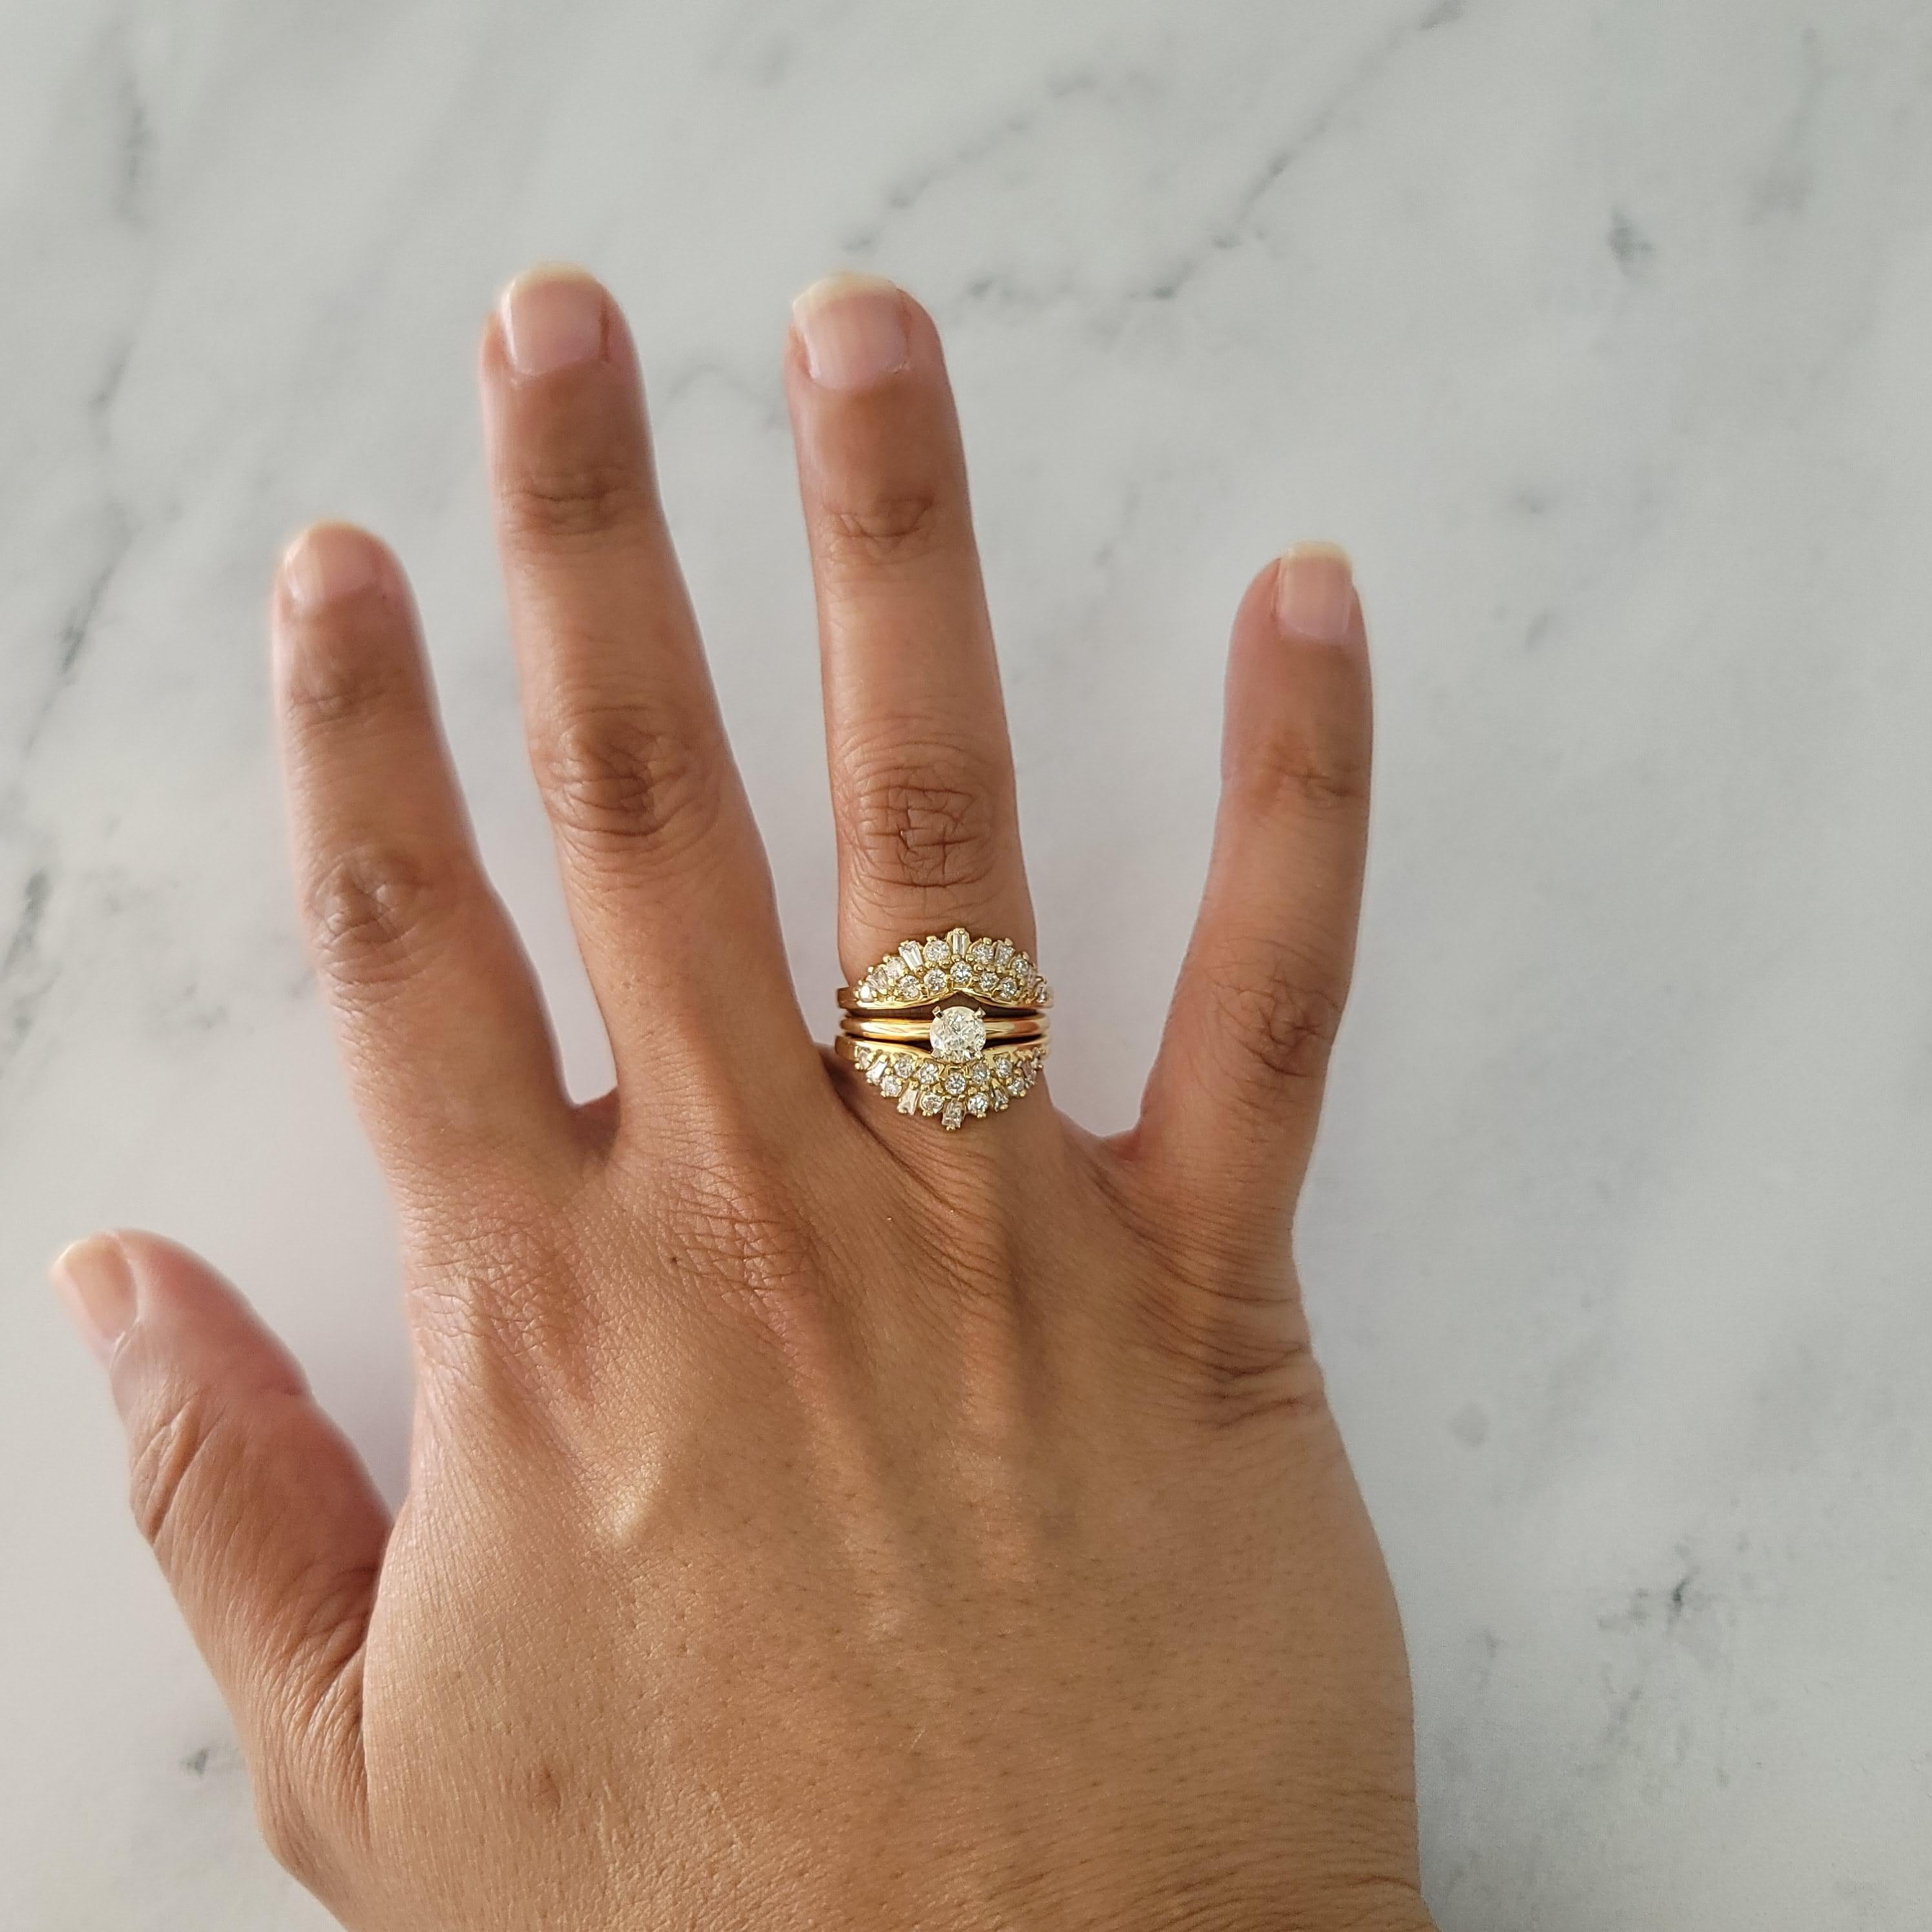 ♥ Ring Summary  ♥

Main Stone: Diamond
Approx. Carat Weight: 1.05cttw
Diamond Clarity: SI1/SI2
Diamond Color: G/H
Stone Cut: Round & Tapered Baguette 
Band Material: 14k Yellow Gold
Gap Measurement: 5mm
Dimension Height: 18mm
Weight: 6 grams
**Ring